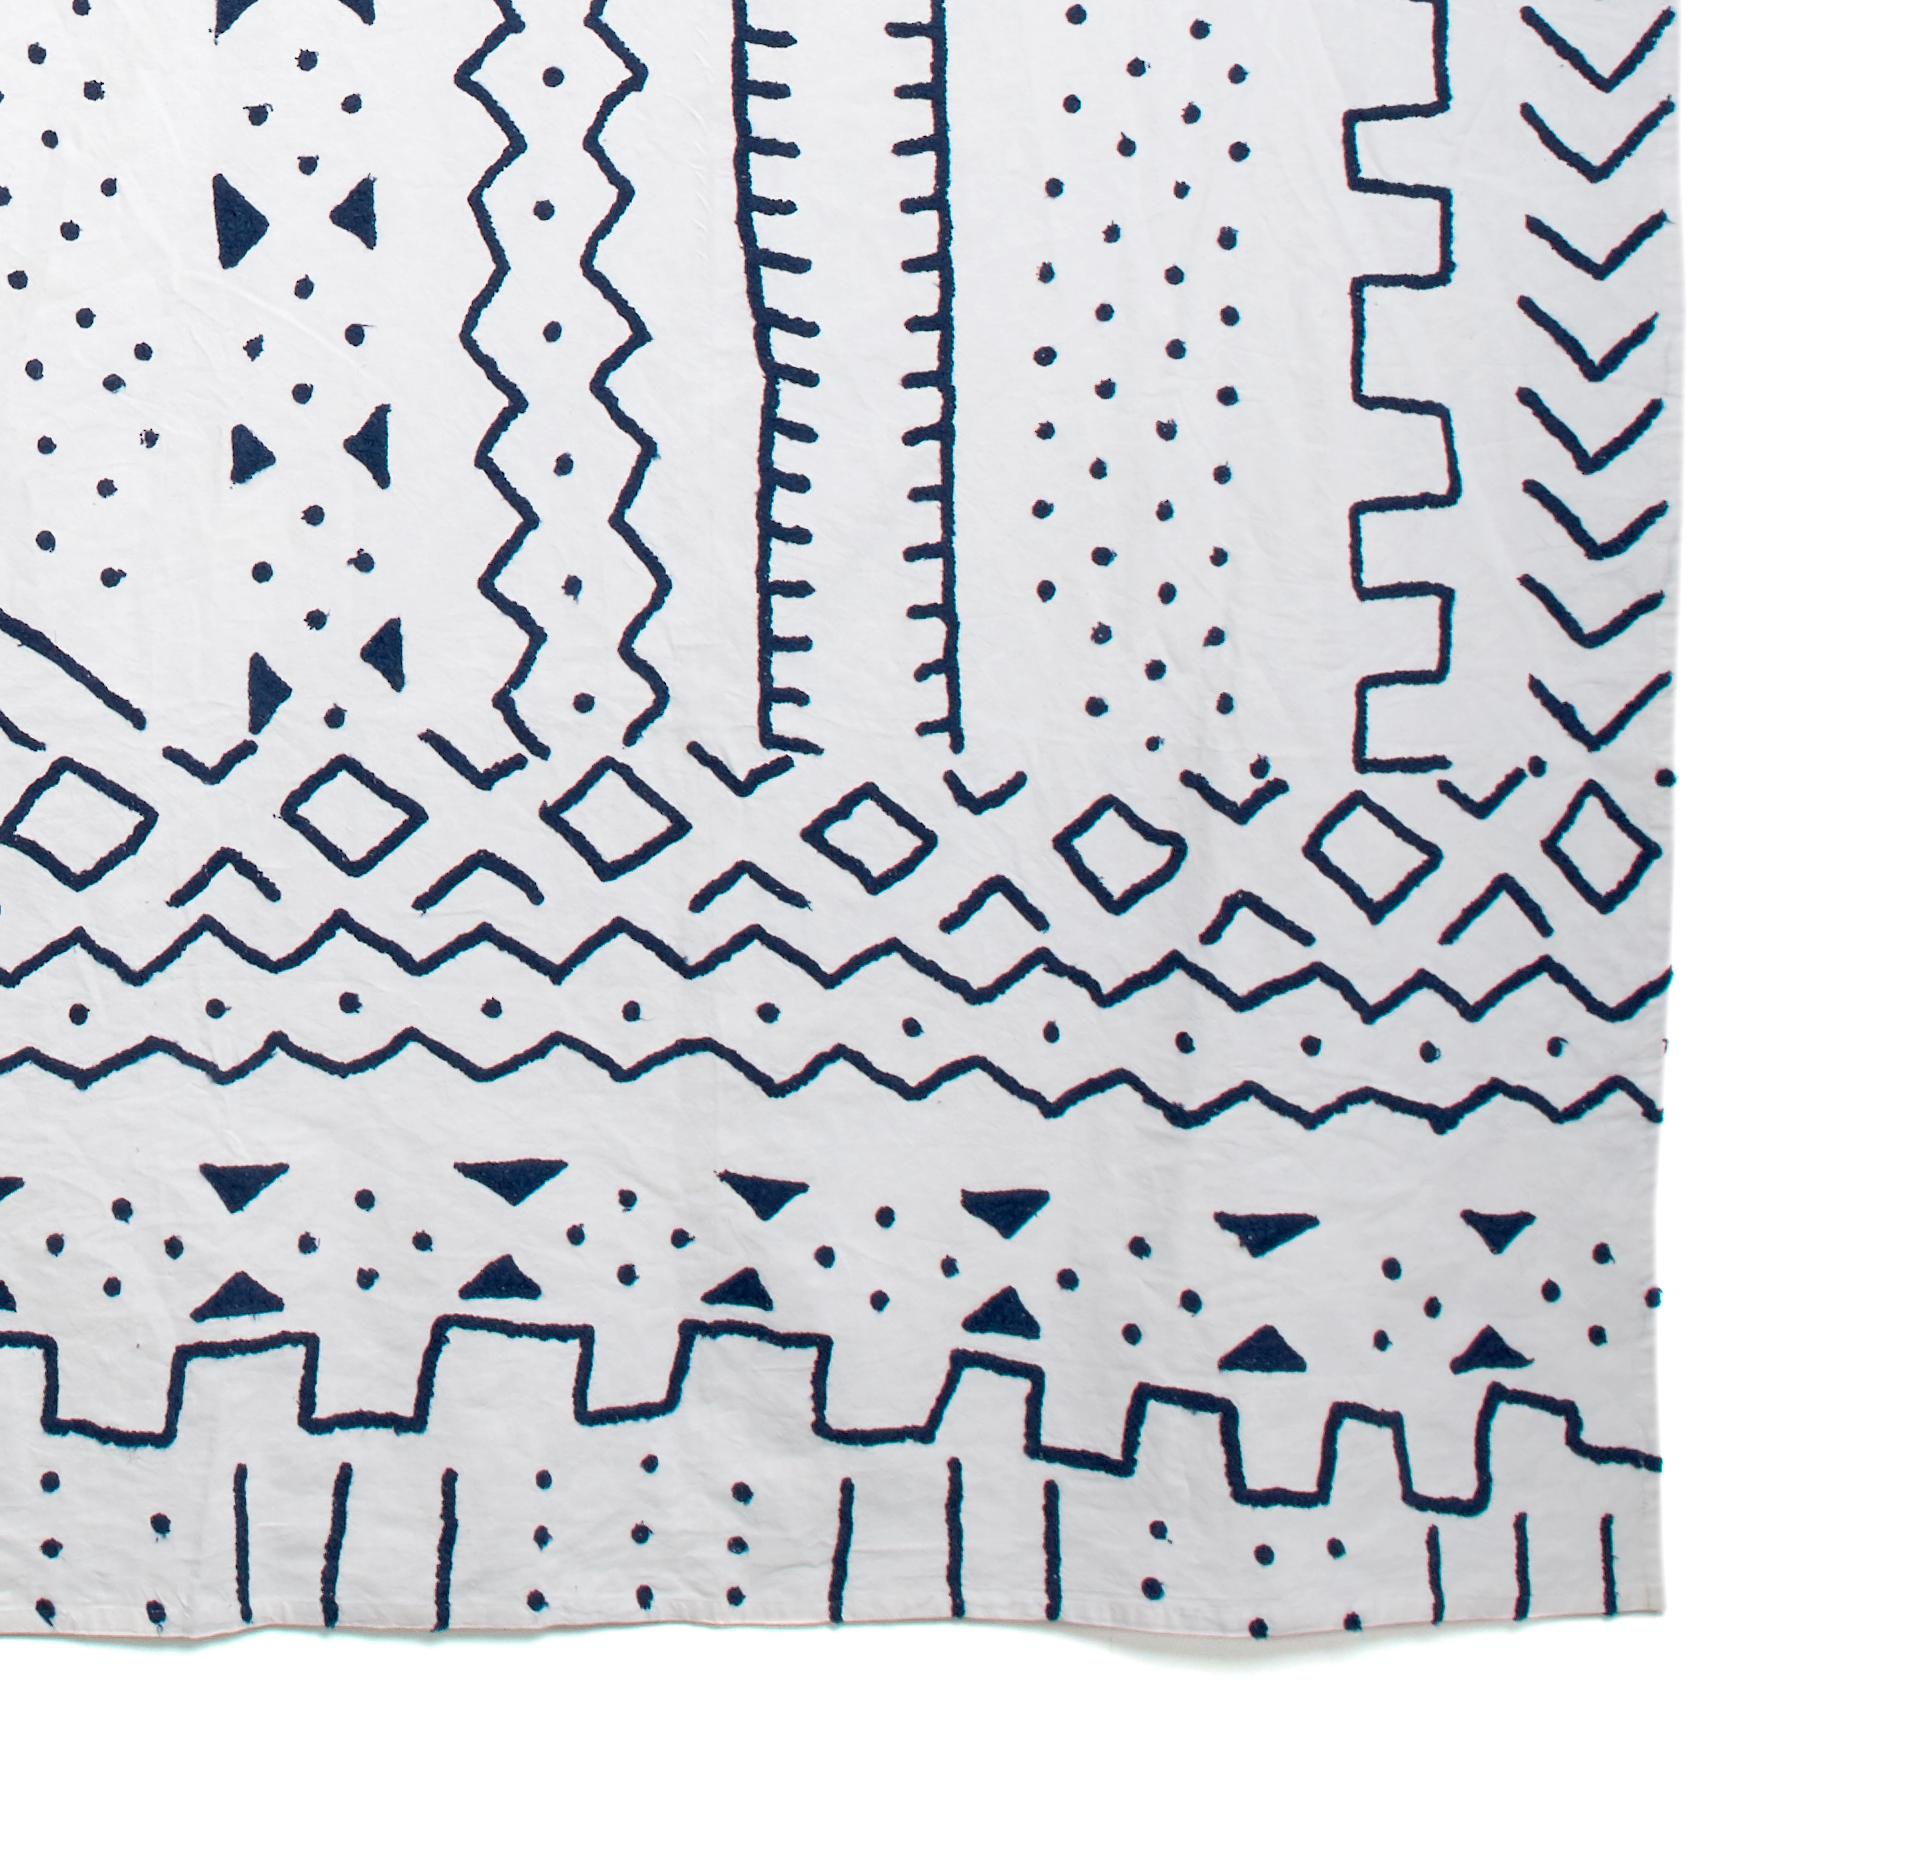 Tribal Inspired White and Navy Embroidered Coverlet Bedspread / Wall Hanging In Excellent Condition For Sale In Brooklyn, NY